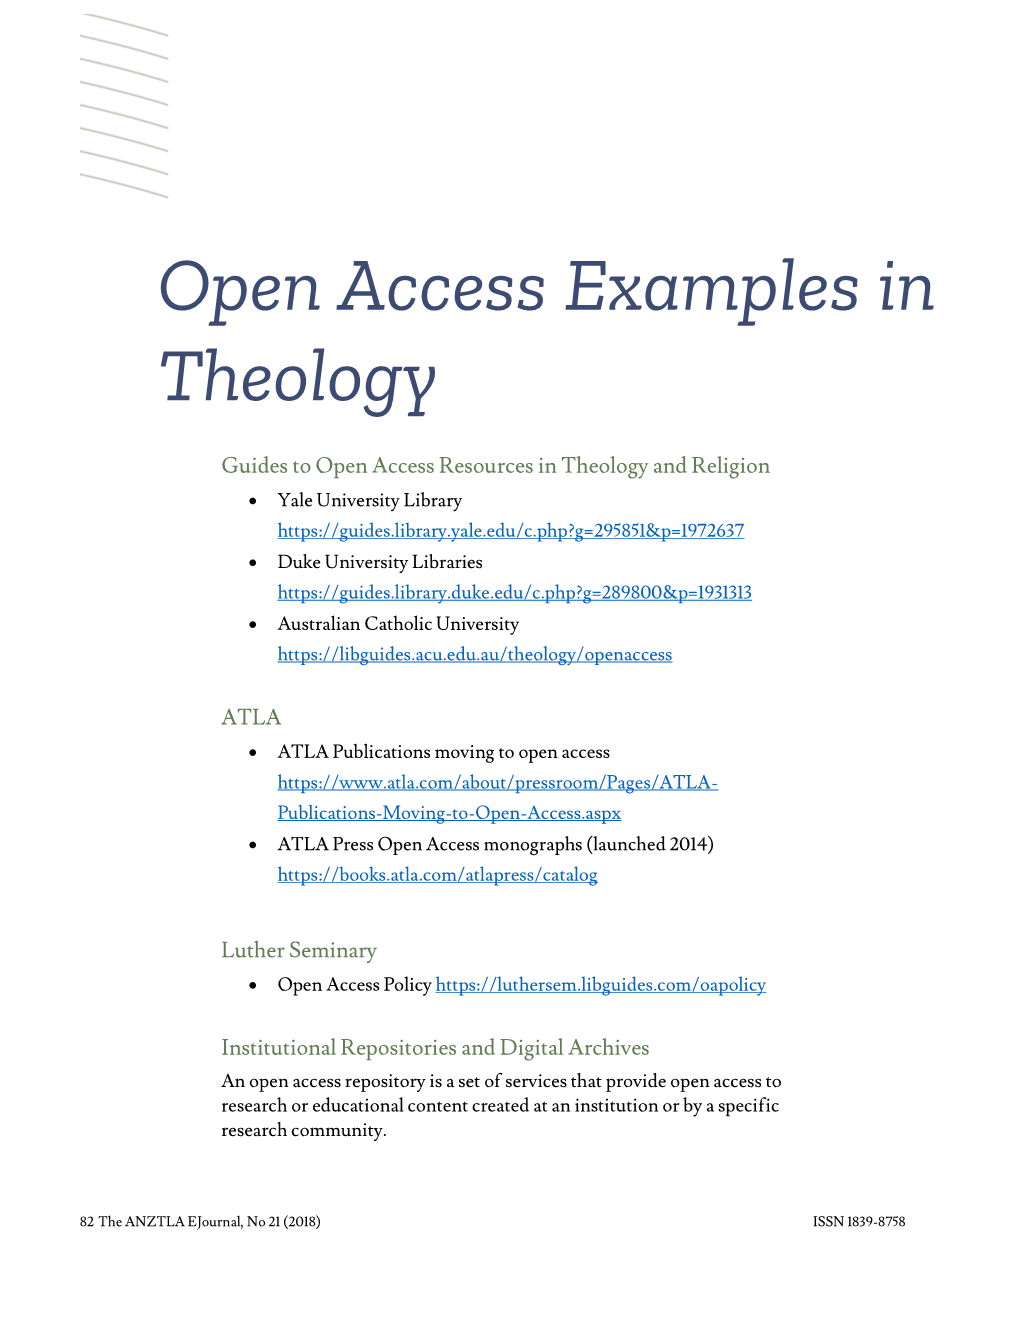 Open Access Examples in Theology